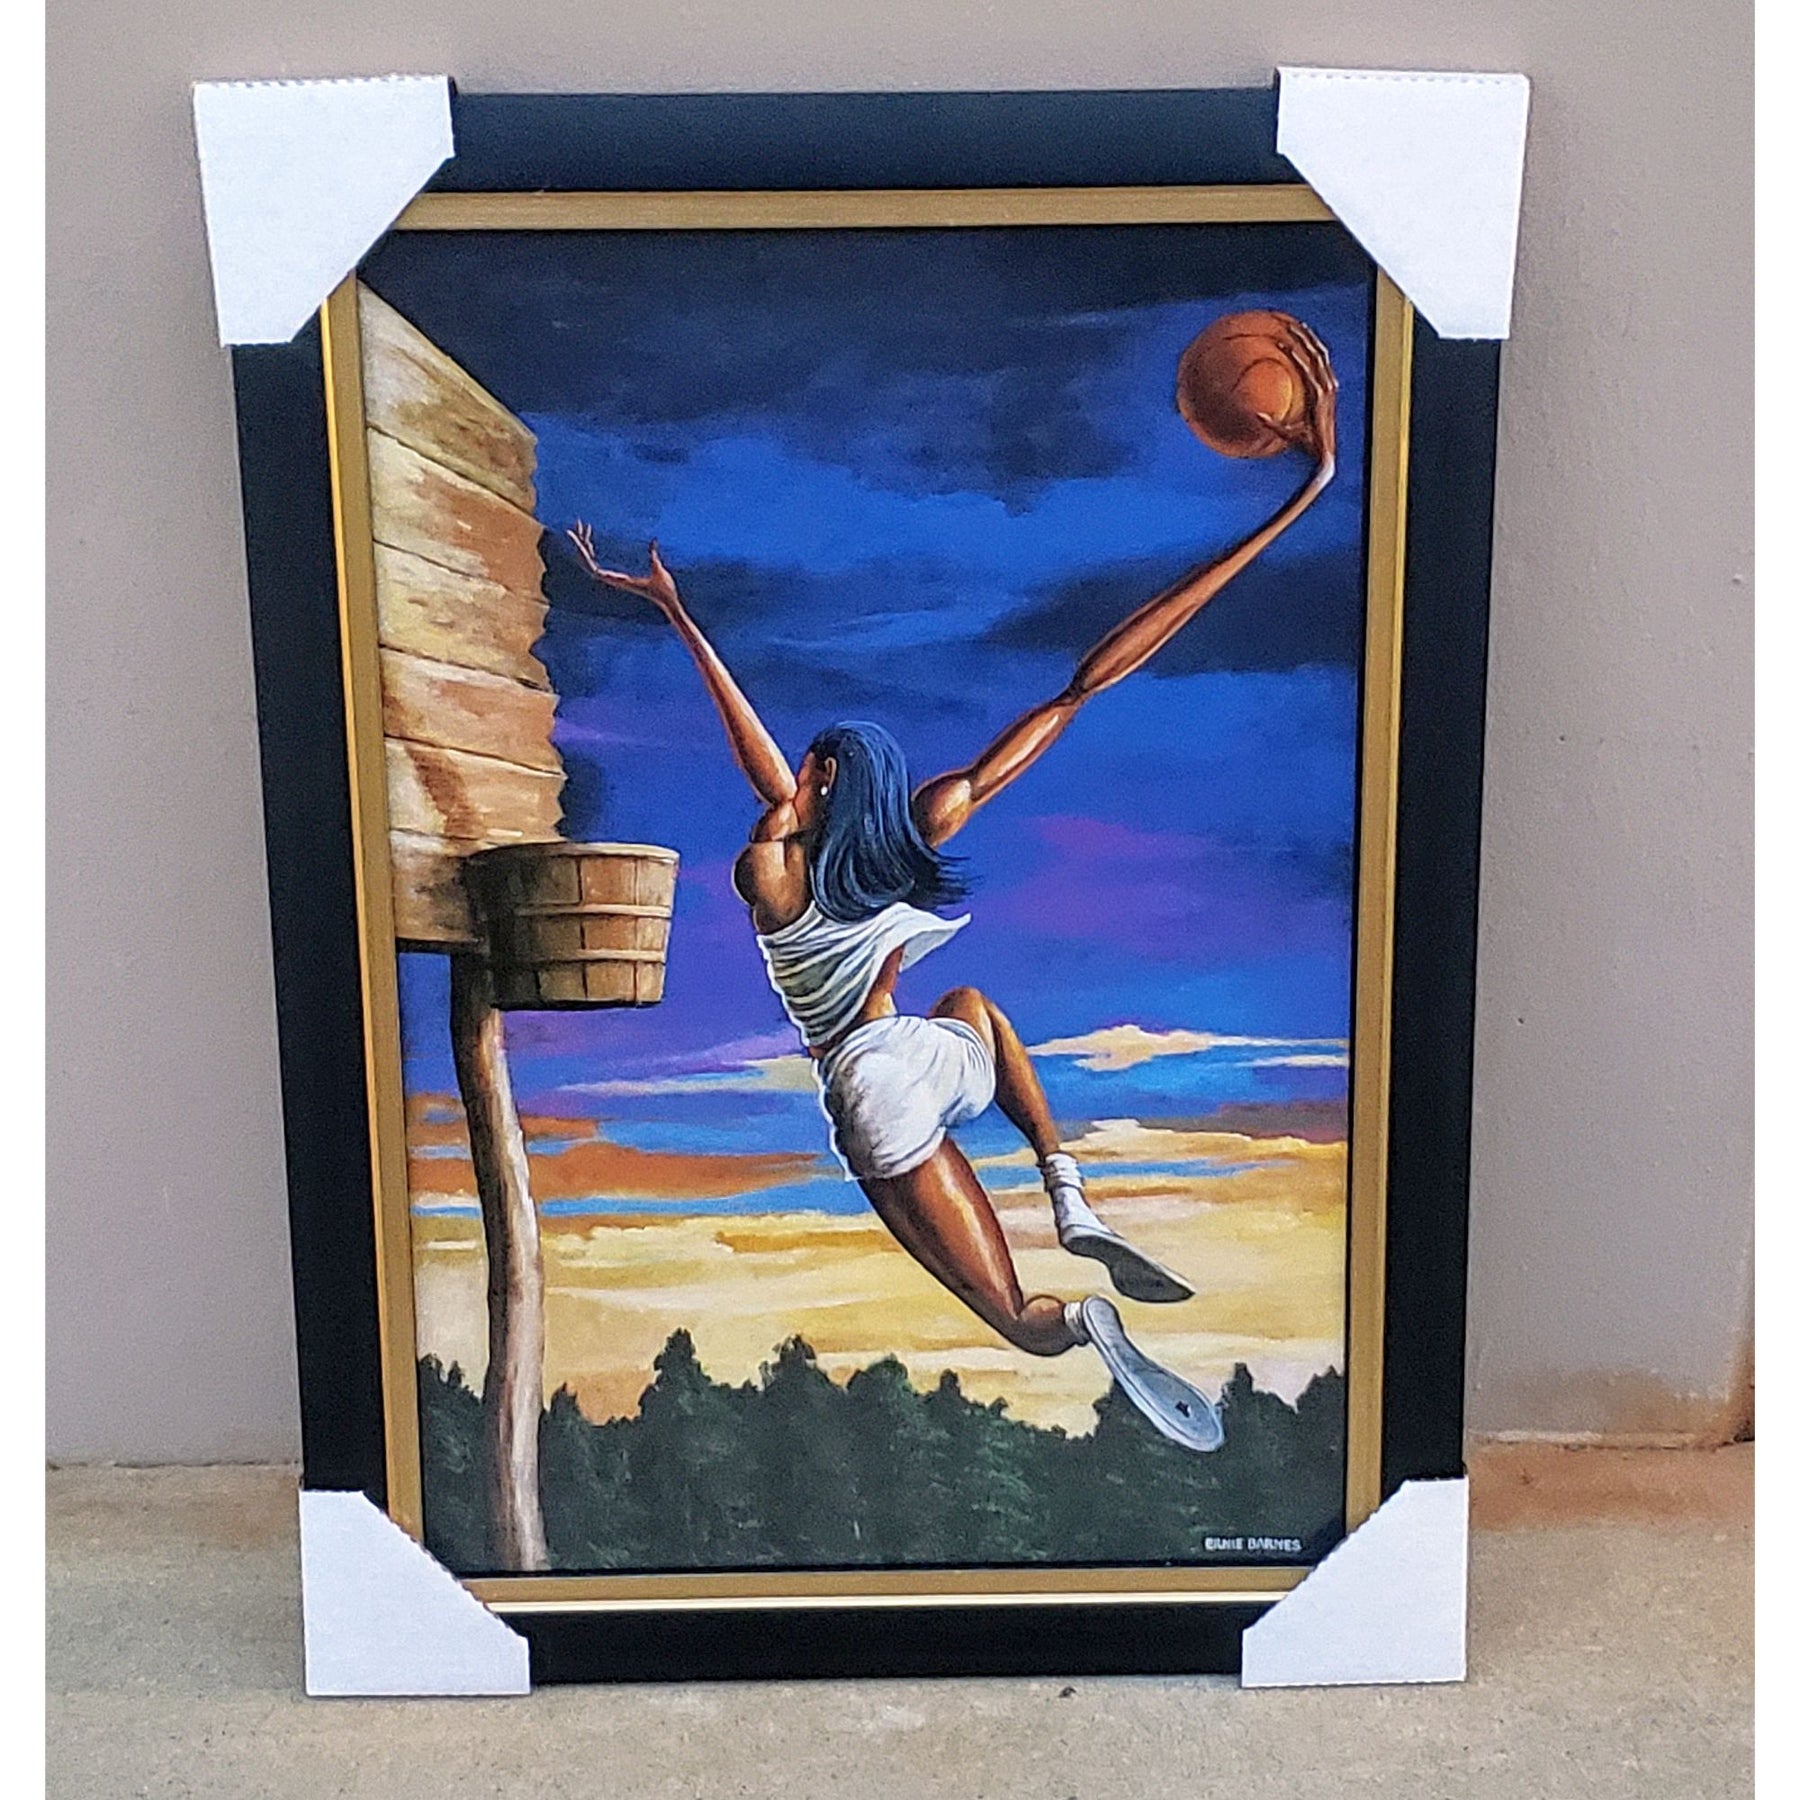 2 of 2: The Dunk (Perseverance): Tribute to Women's Basketball by Ernie Barnes